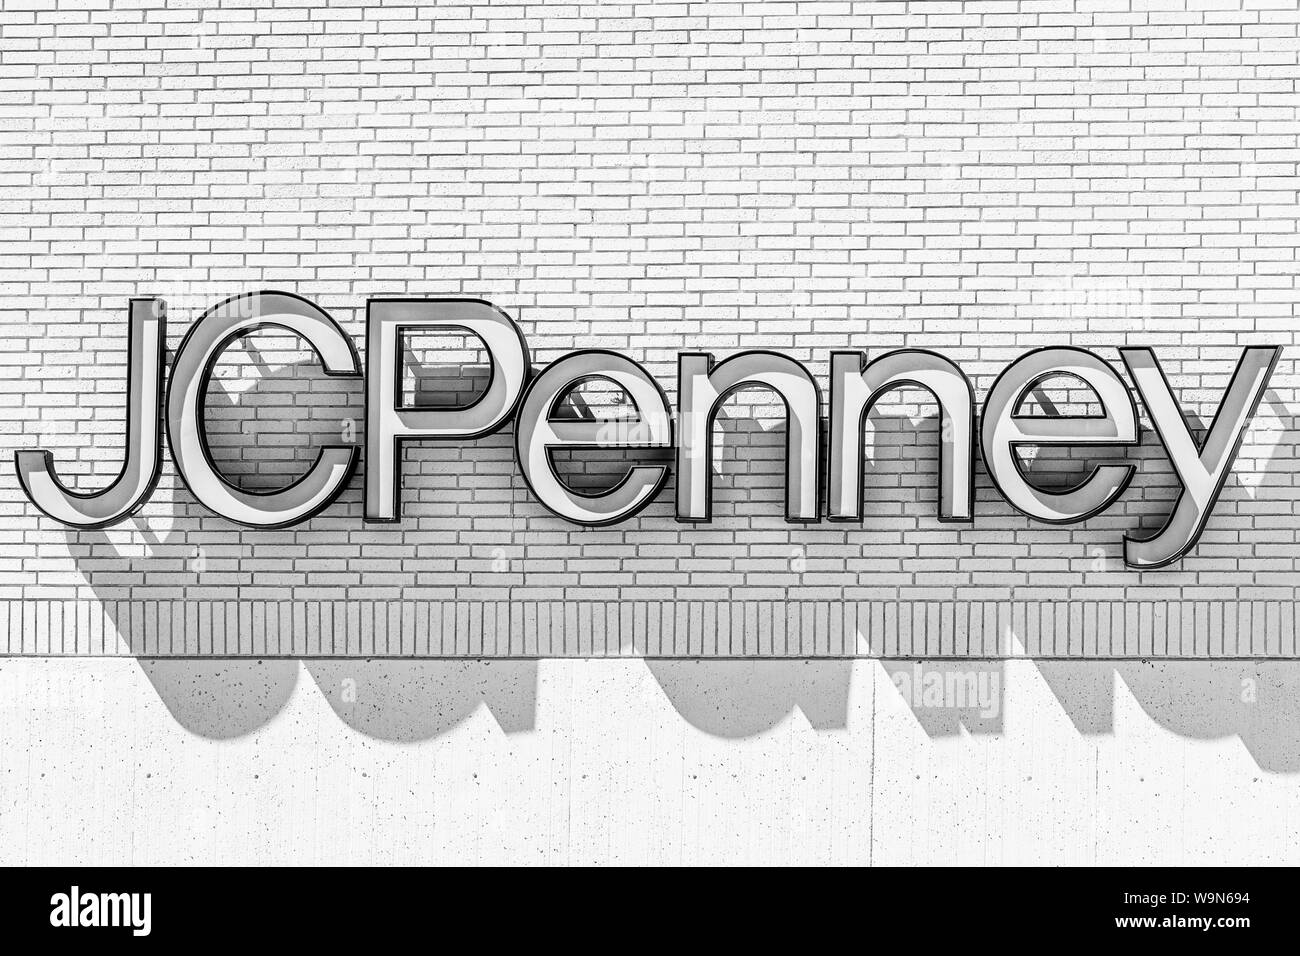 August 14, 2019 San Jose / CA / USA - Close up of JCPenney sign at a department store located in a mall in South San Francisco bay area Stock Photo